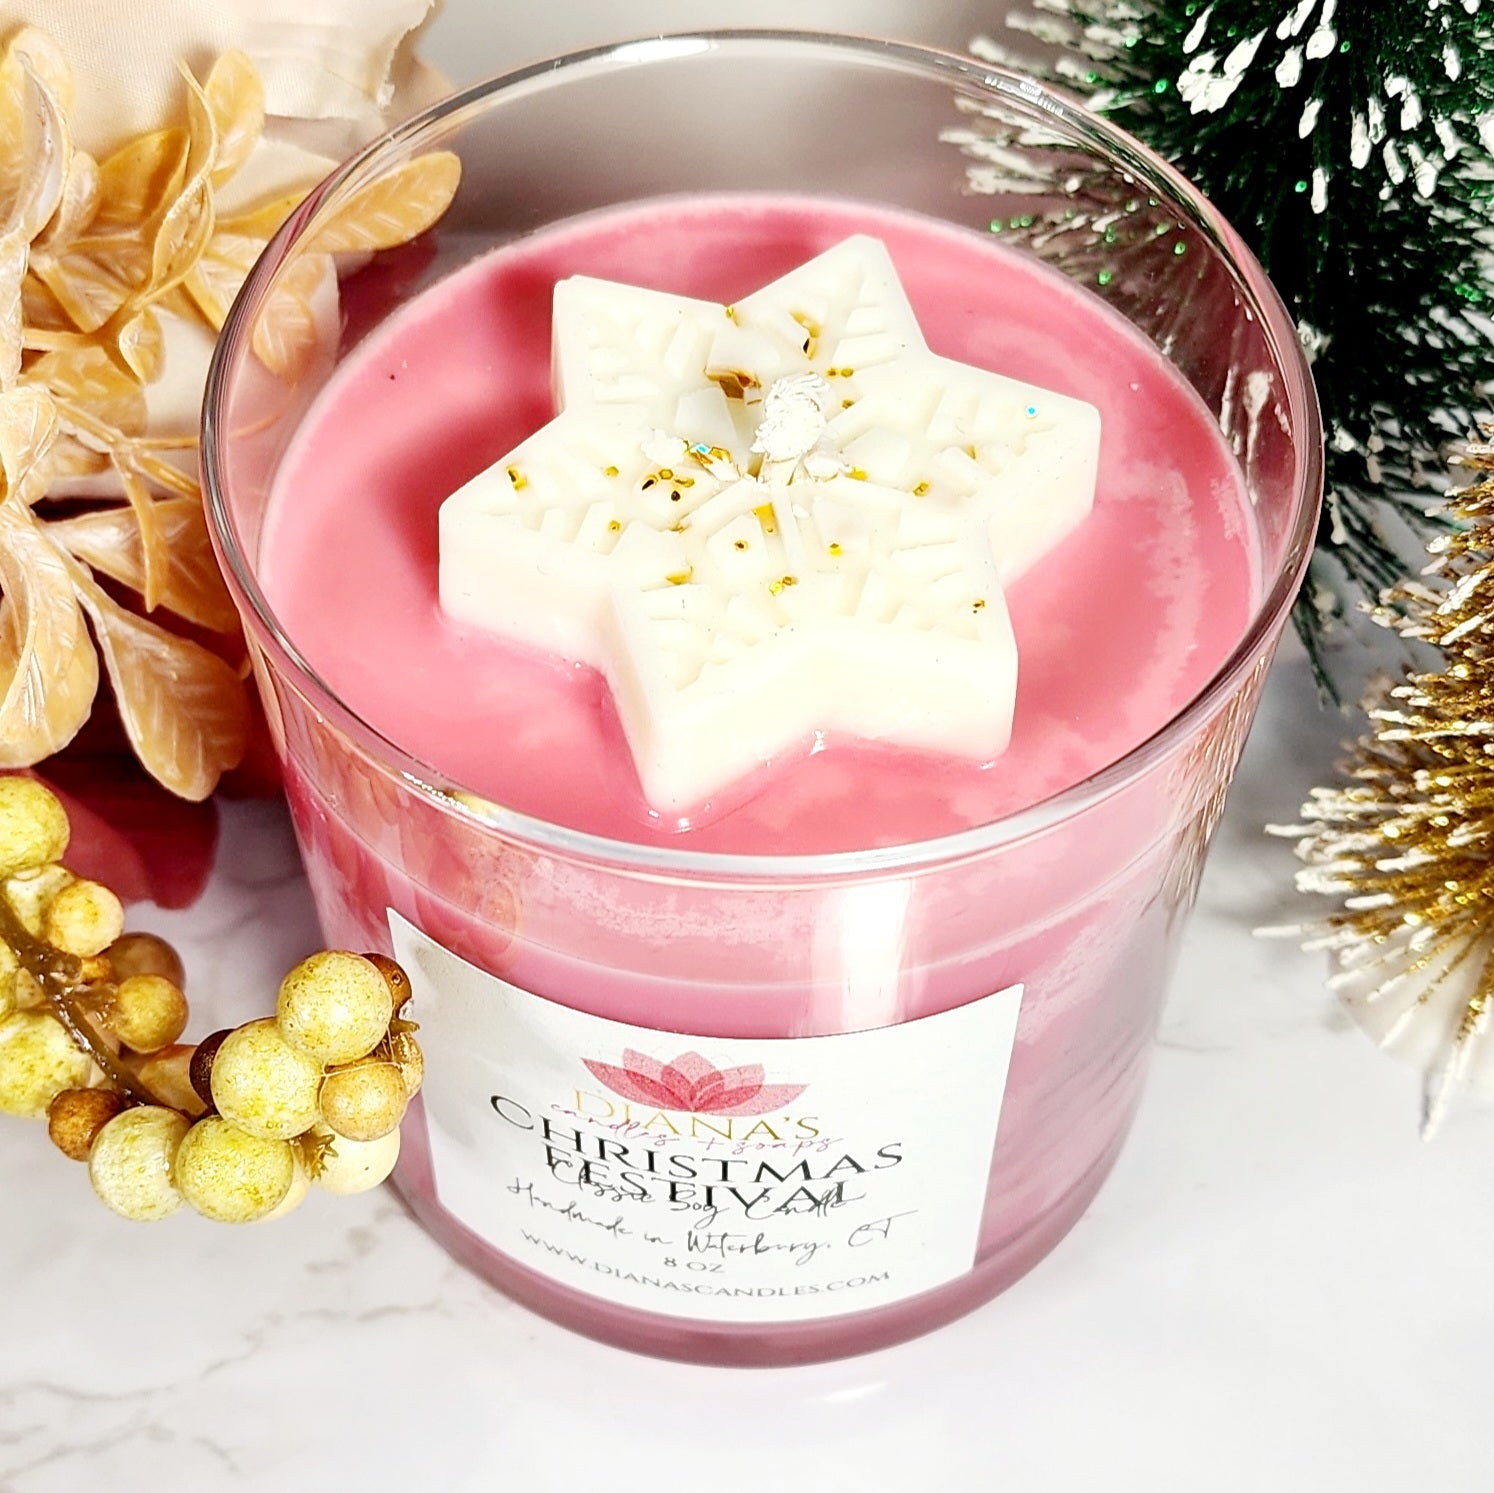 Christmas Festival Candle - Diana's Candles and Soaps 